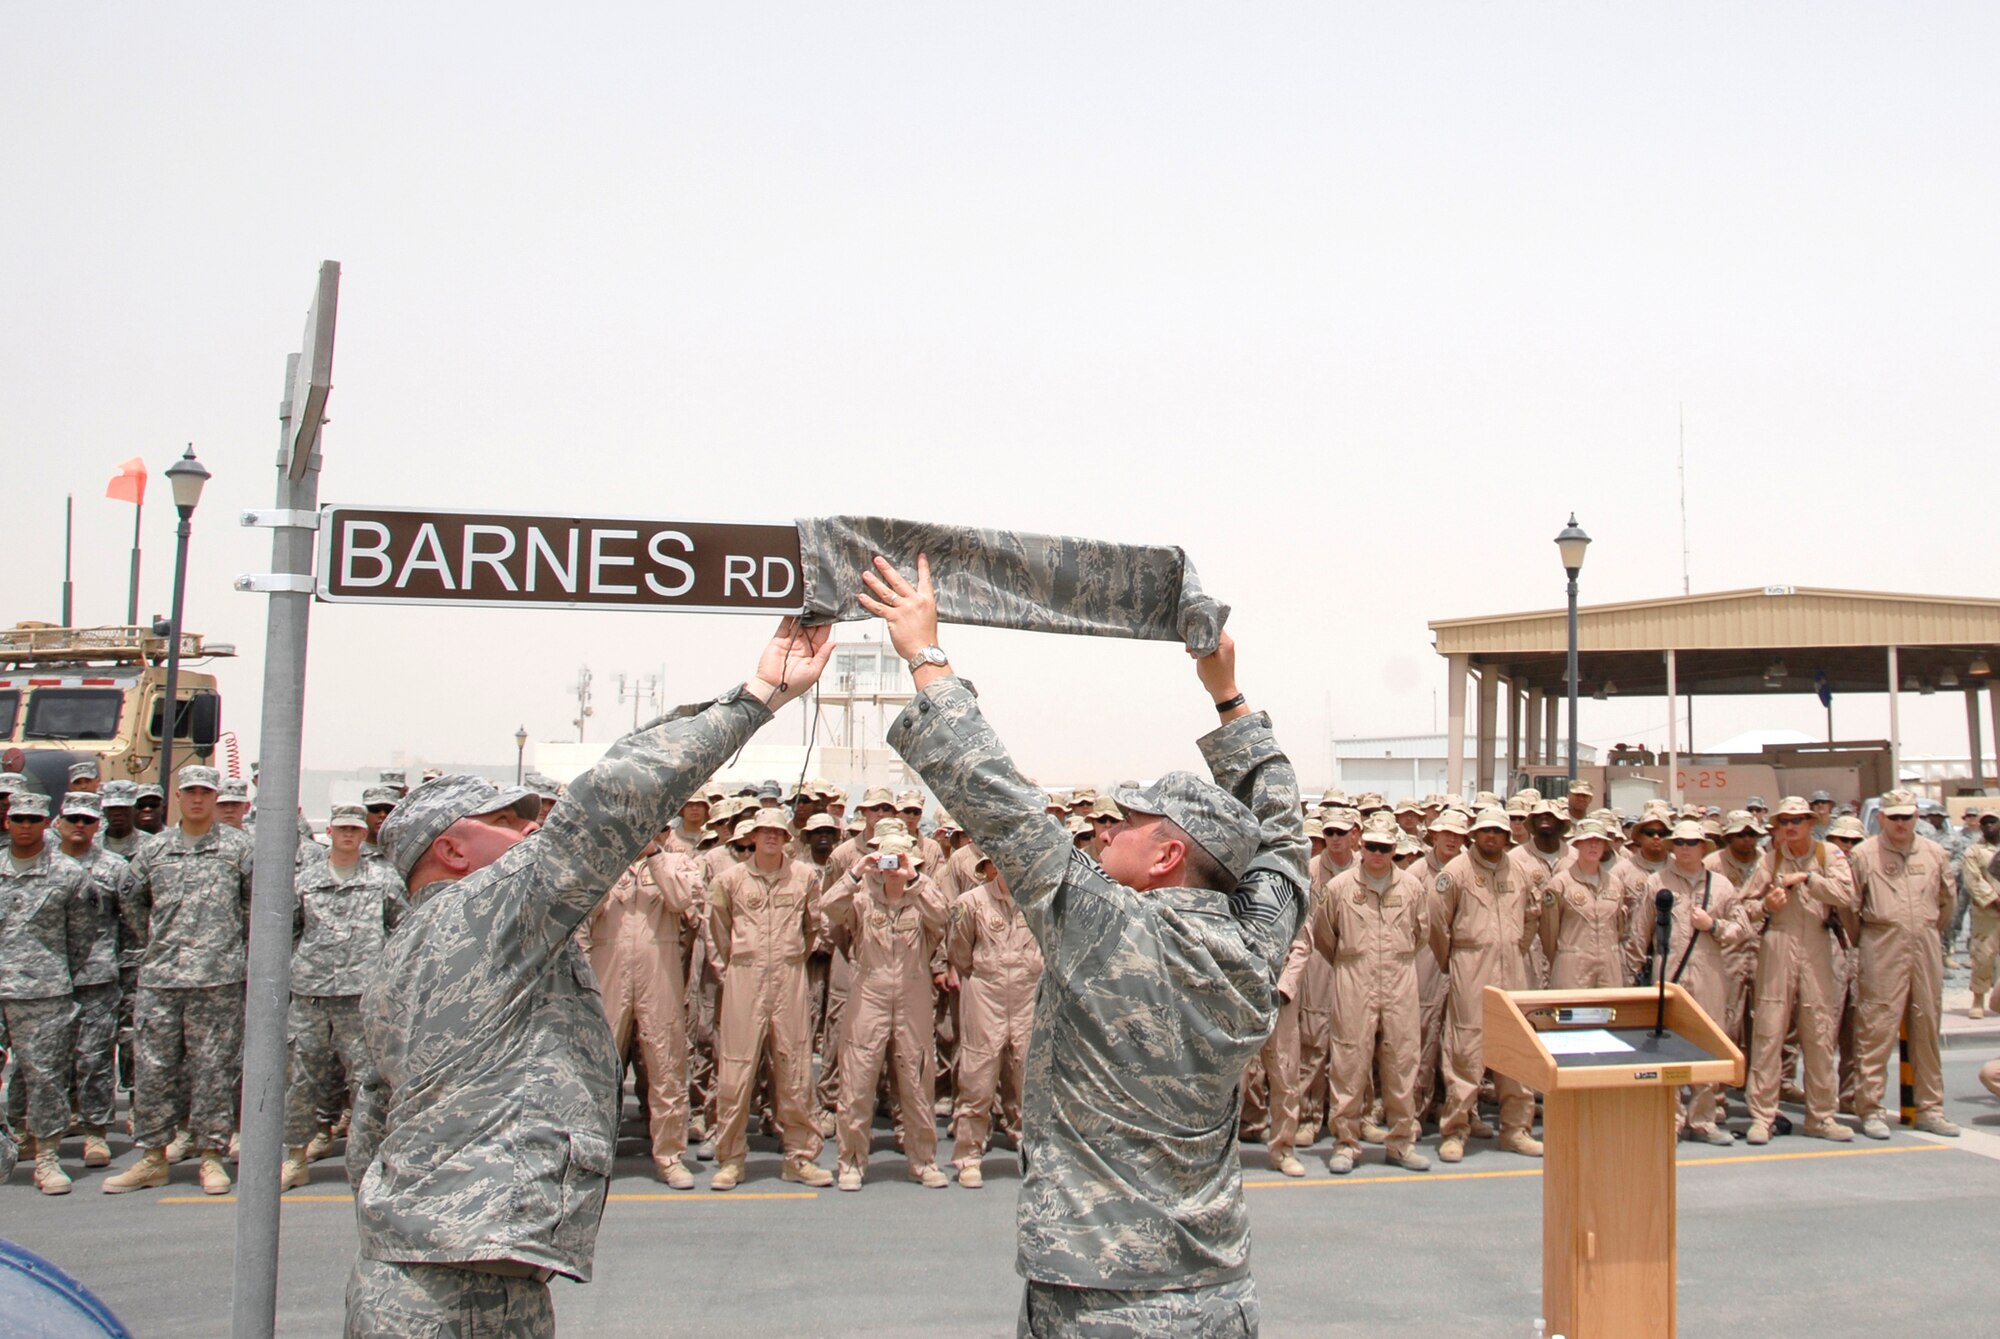 SOUTHWEST ASIA -- Chief Master Sergeant Carl Hunsinger (left), the 386th Air Expeditionary Wing command chief, and Chief Master Sgt. Richard Bunce (center), who Airman 1st Class Eric Barnes worked for at the time of his death in 2007, unveil the street sign during a street dedication ceremony June 10, 2008 on an air base in the Persian Gulf Region. The street dedication ceremony is a tribute to Airman Barnes and his family with the naming of Barnes Road. Airman Barnes, 20, of Lorain, Ohio, died June 10, 2007 as a result of an improved explosive device attack on an Air Force convoy about 100 miles south of Baghdad, Iraq. He was deployed from the 90th Logistics Readiness Squadron at F.E. Warren Air Force Base, Wyo.  (U.S. Air Force photo/ Staff Sgt. Patrick Dixon)  